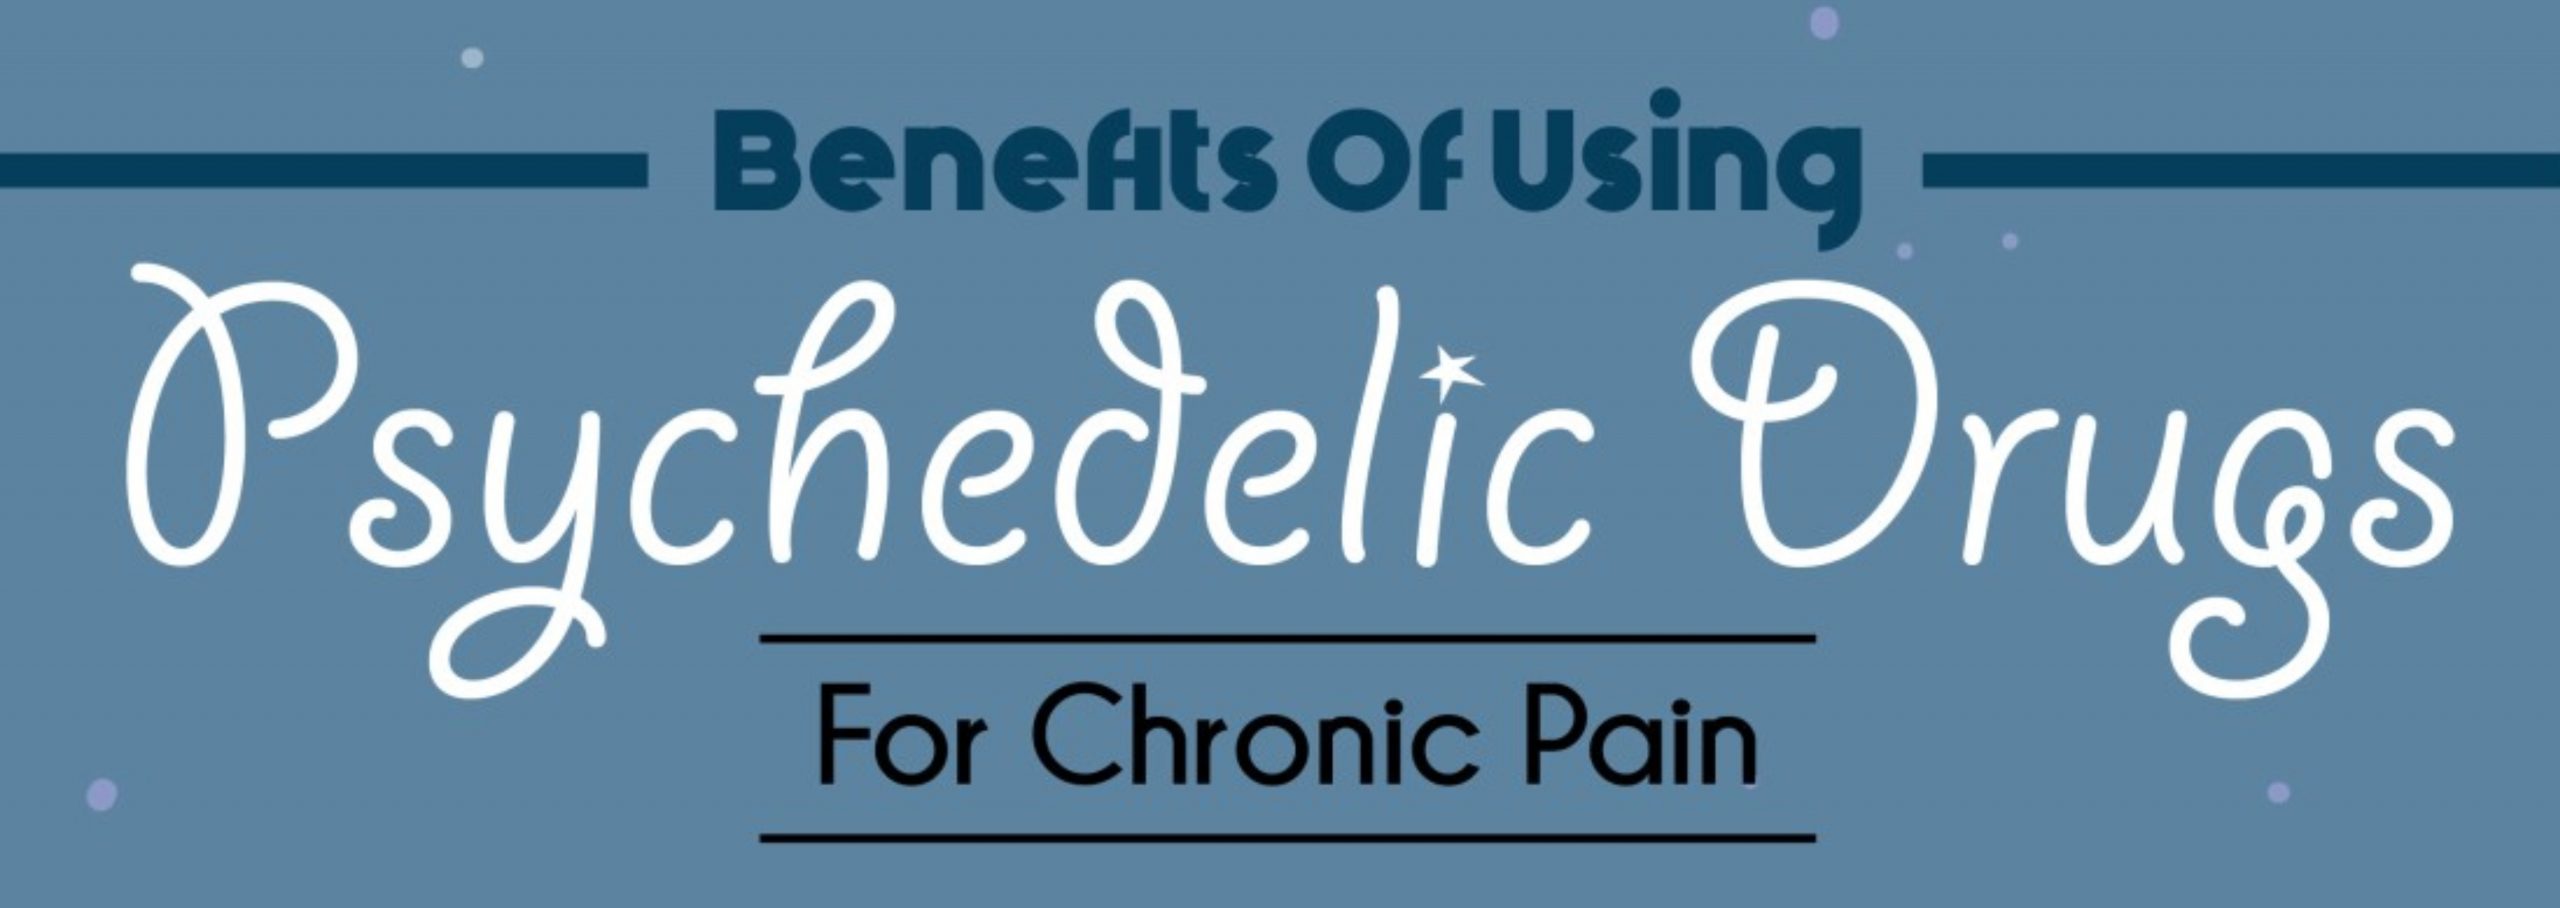 Benefits For Using Psychedelics In Chronic Pain